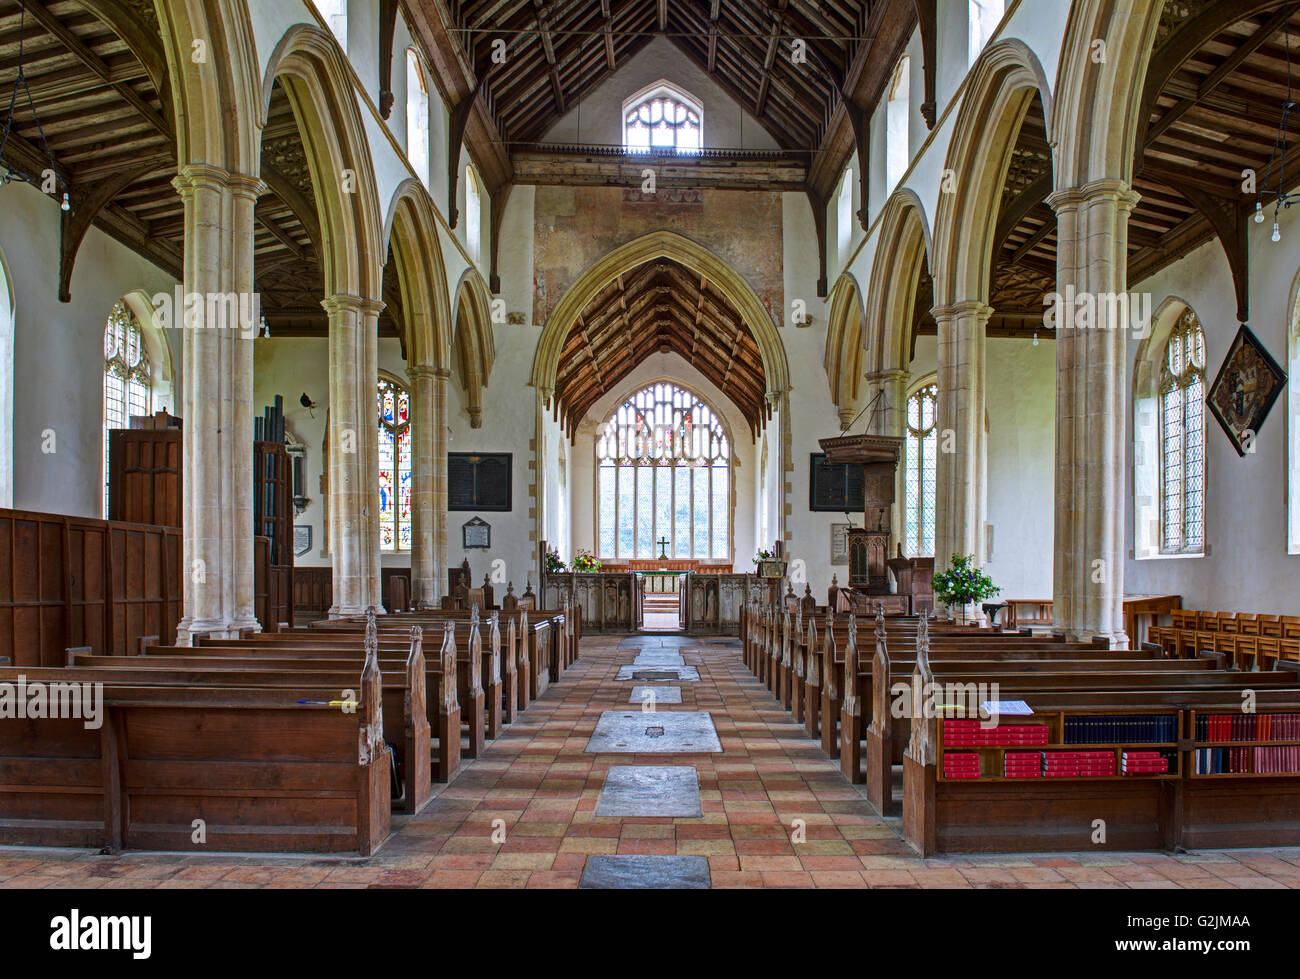 Interior of the church of St Peter and St Paul, in the village of Salle, Norfolk, England UK Stock Photo